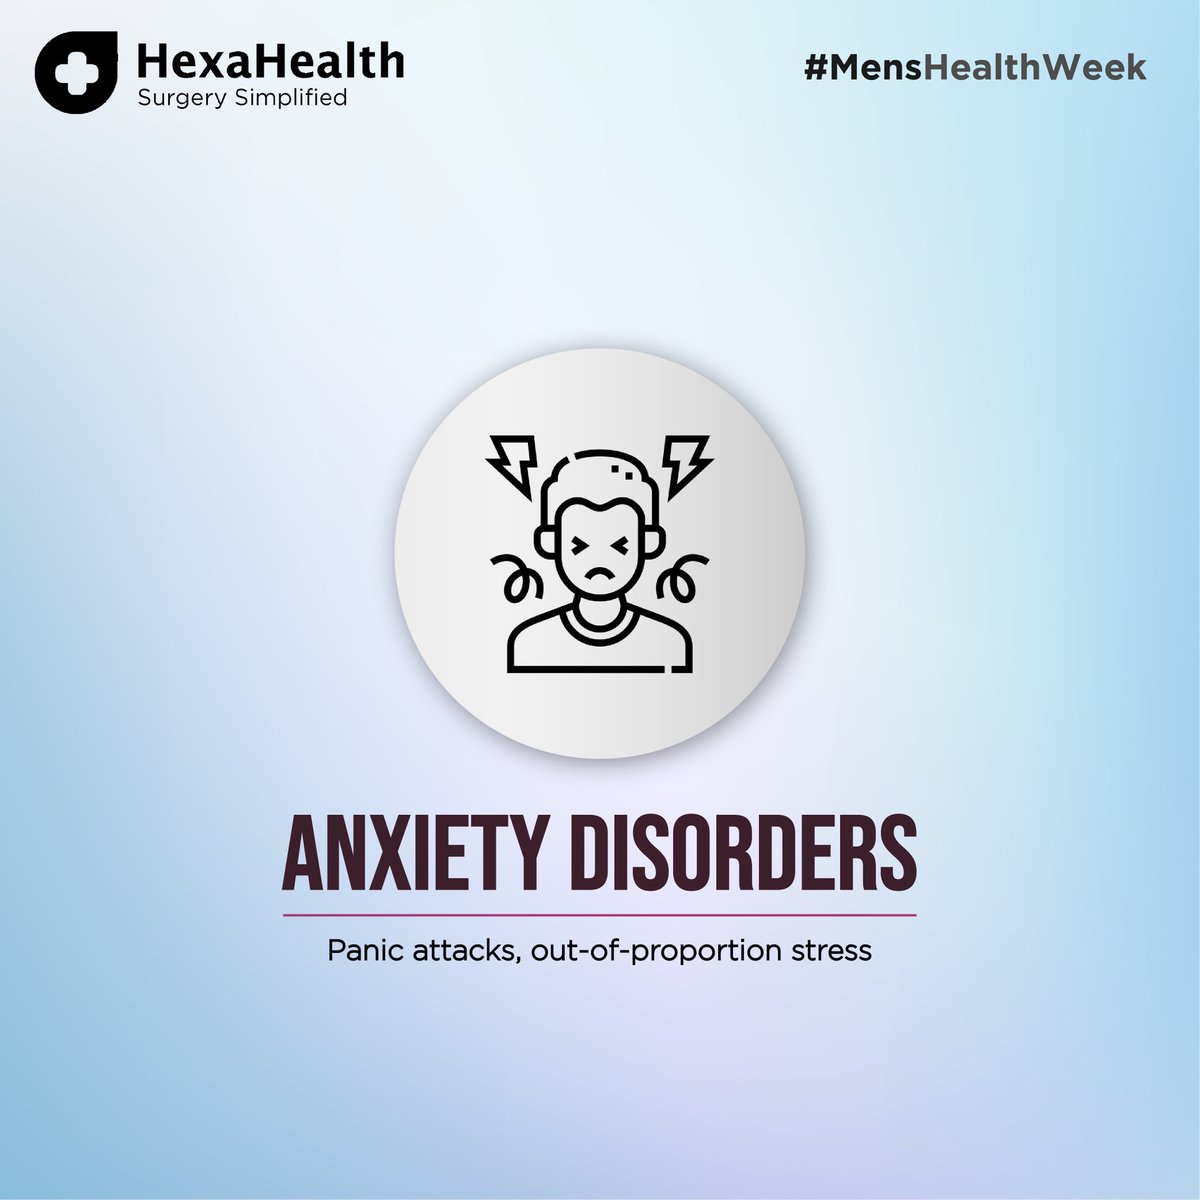 His mental health problems may outweigh physical issues! Know more this #MensHealthWeek!

#HexaHealth #WeCARE #HealthyLife #FamilyHealth #surgery #surgeons #bestsurgeons #MensHealthWeek #depression #anxiety #burnout #anxietydisorder #overwhelmed #mentalexhaustion #panicattack